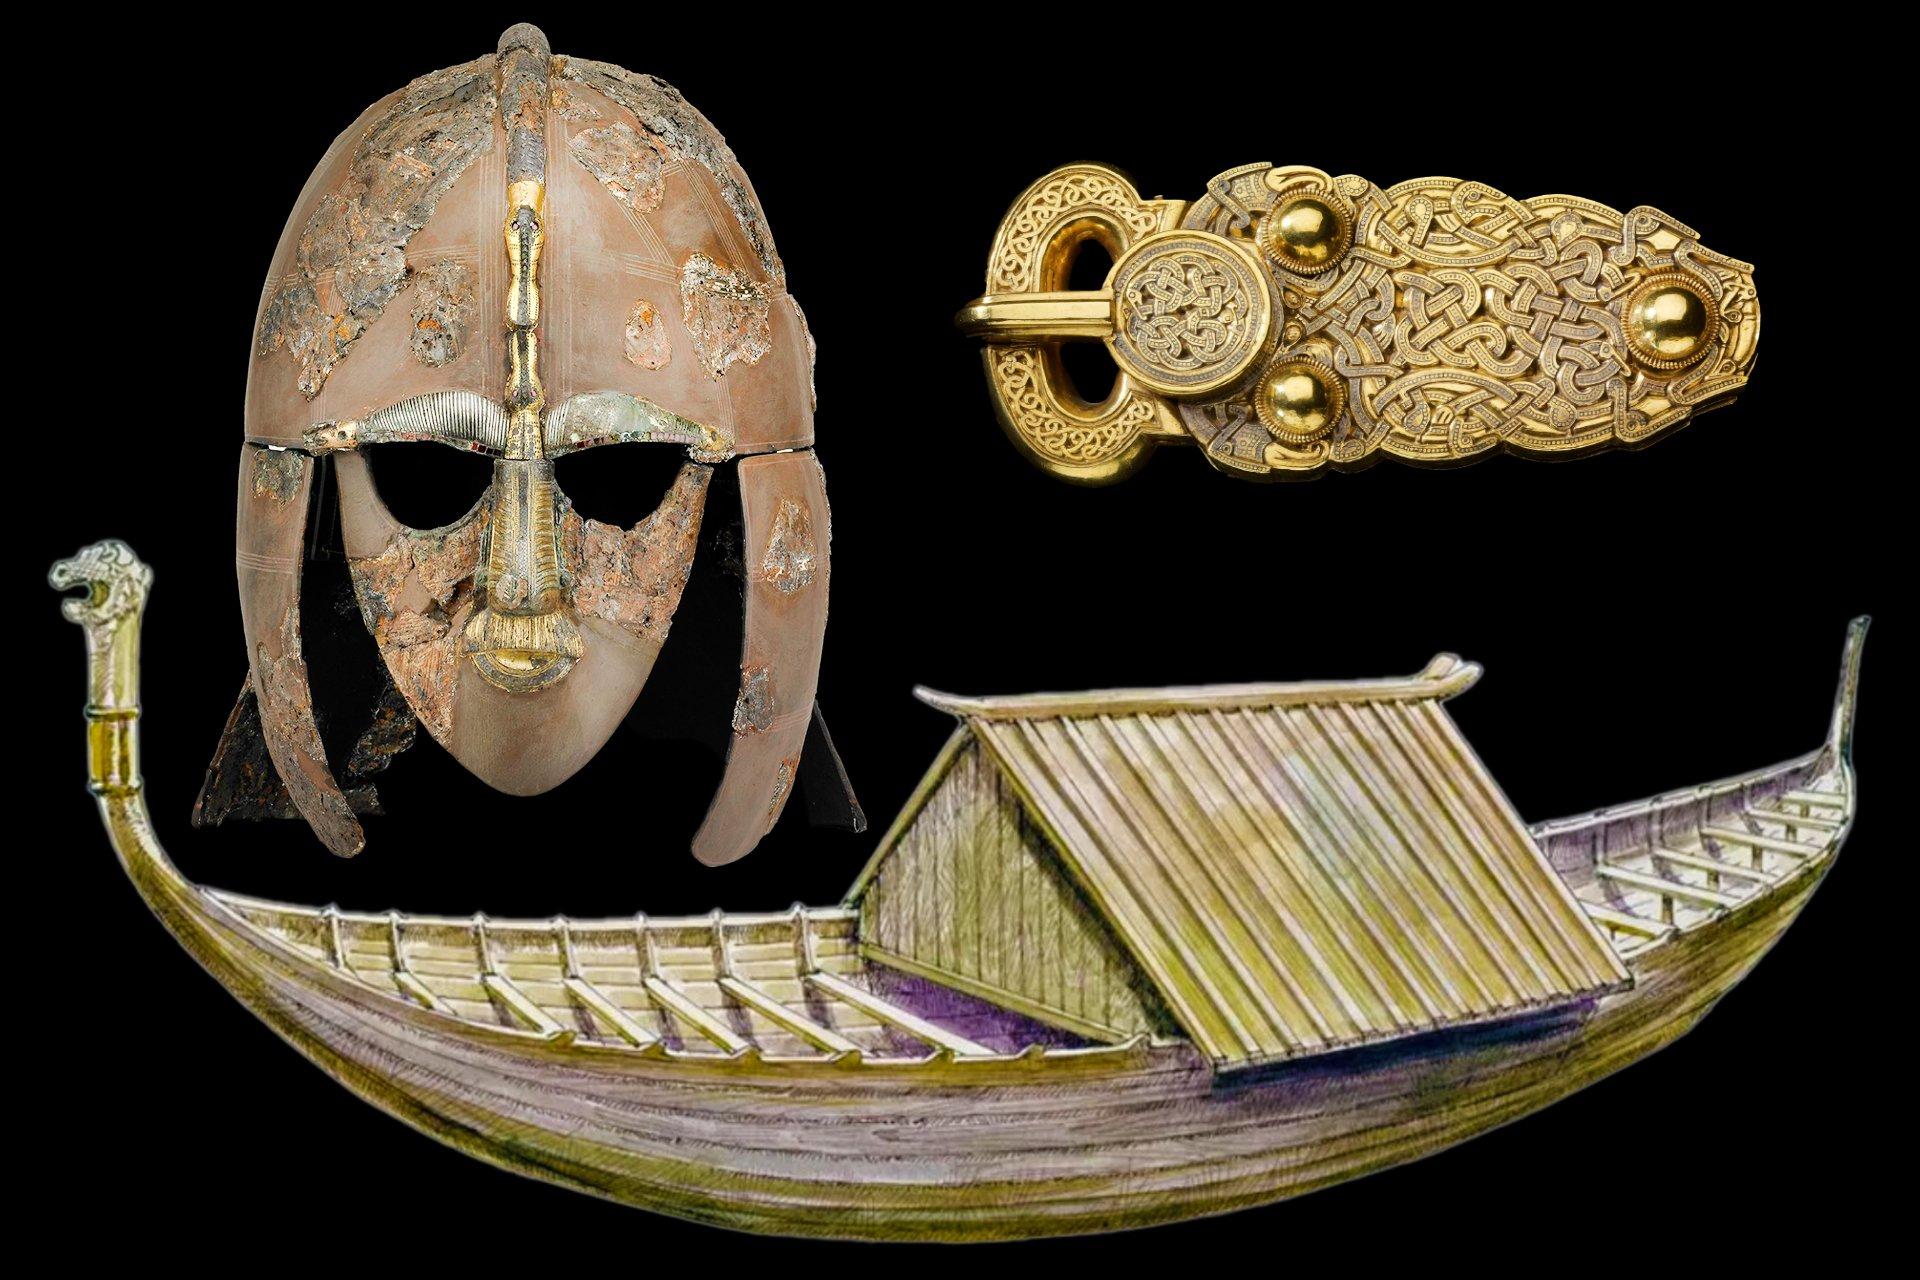 What Is the Sutton Hoo Burial? A Ship in a Sea of Grass